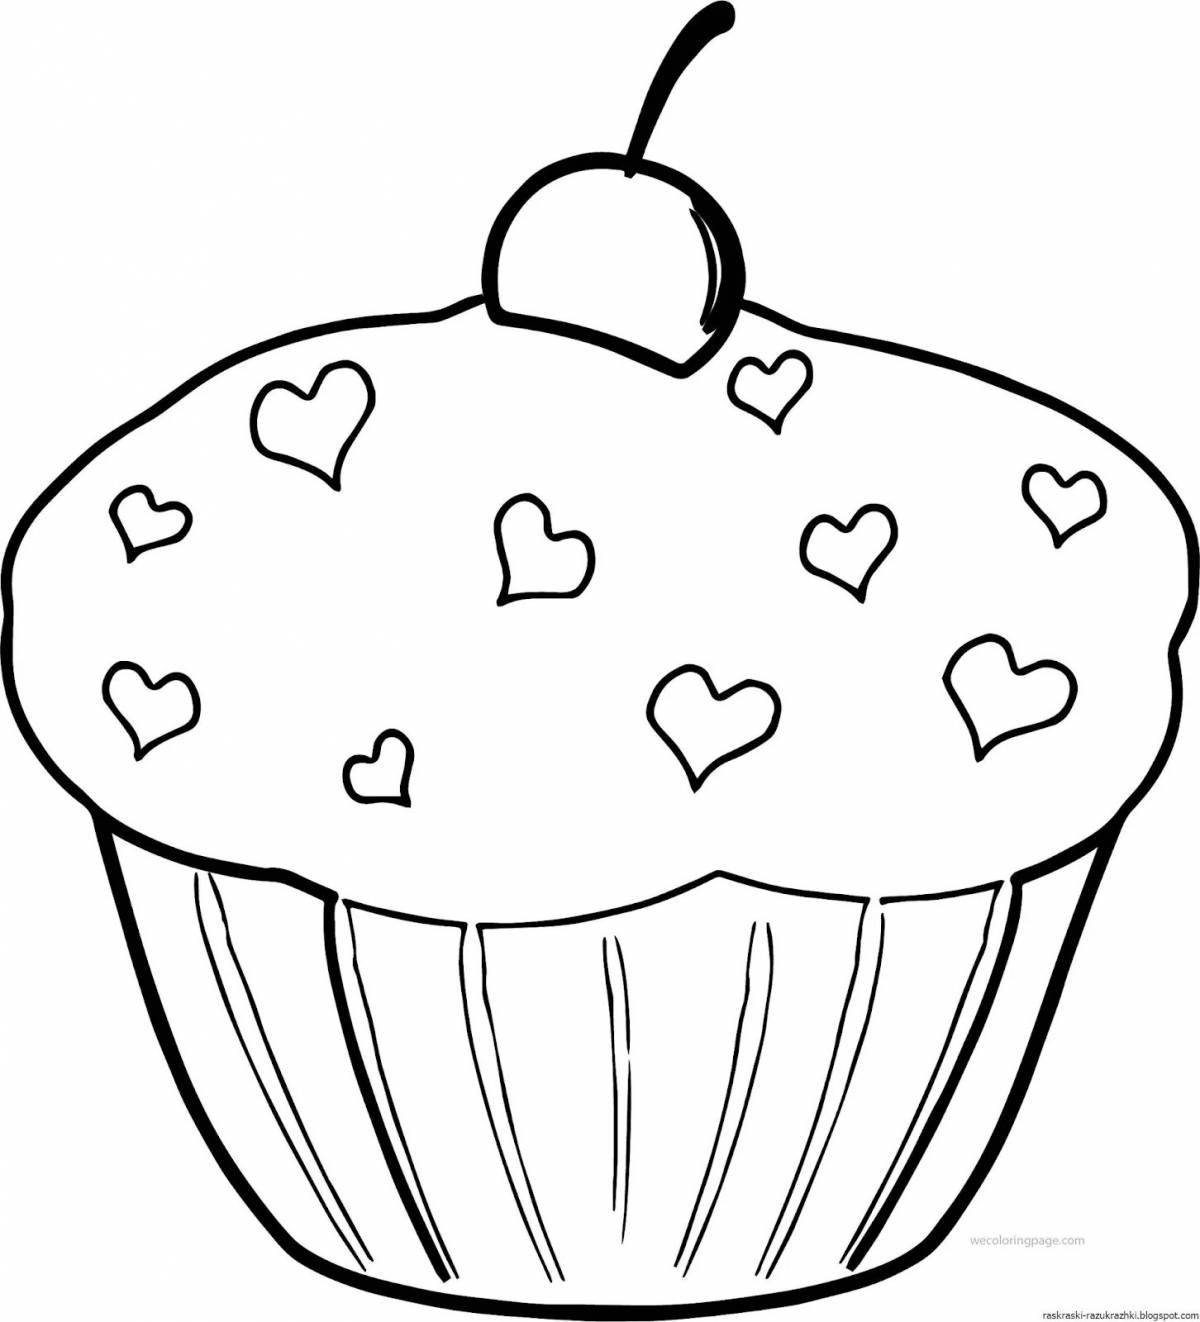 Healthy light food coloring page